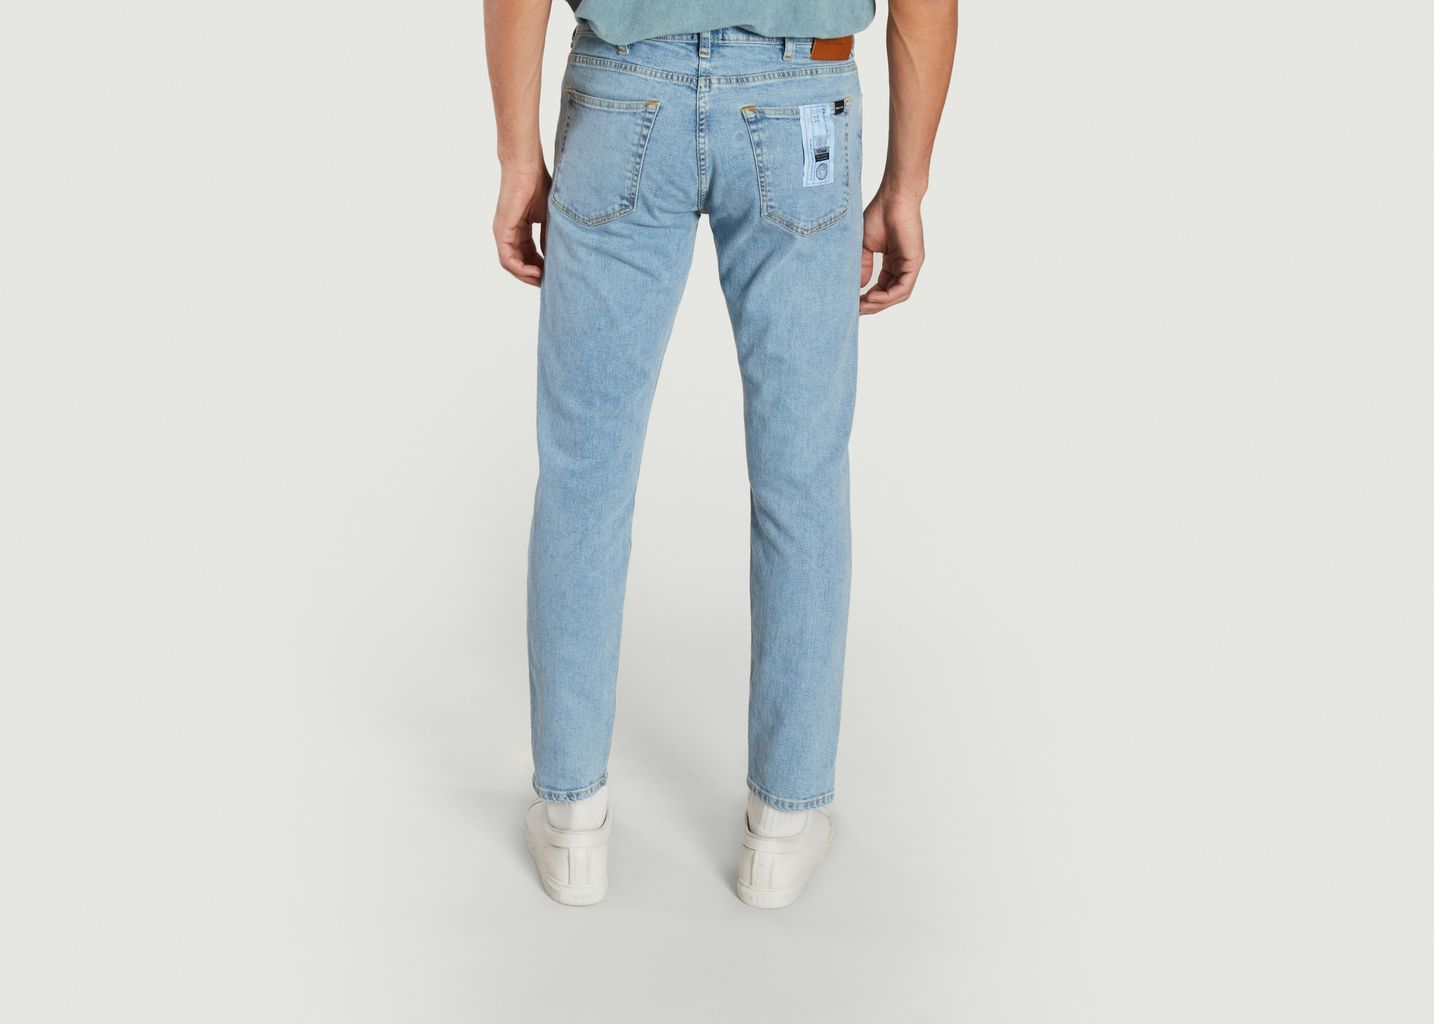 Washed stretch jeans - PS by PAUL SMITH